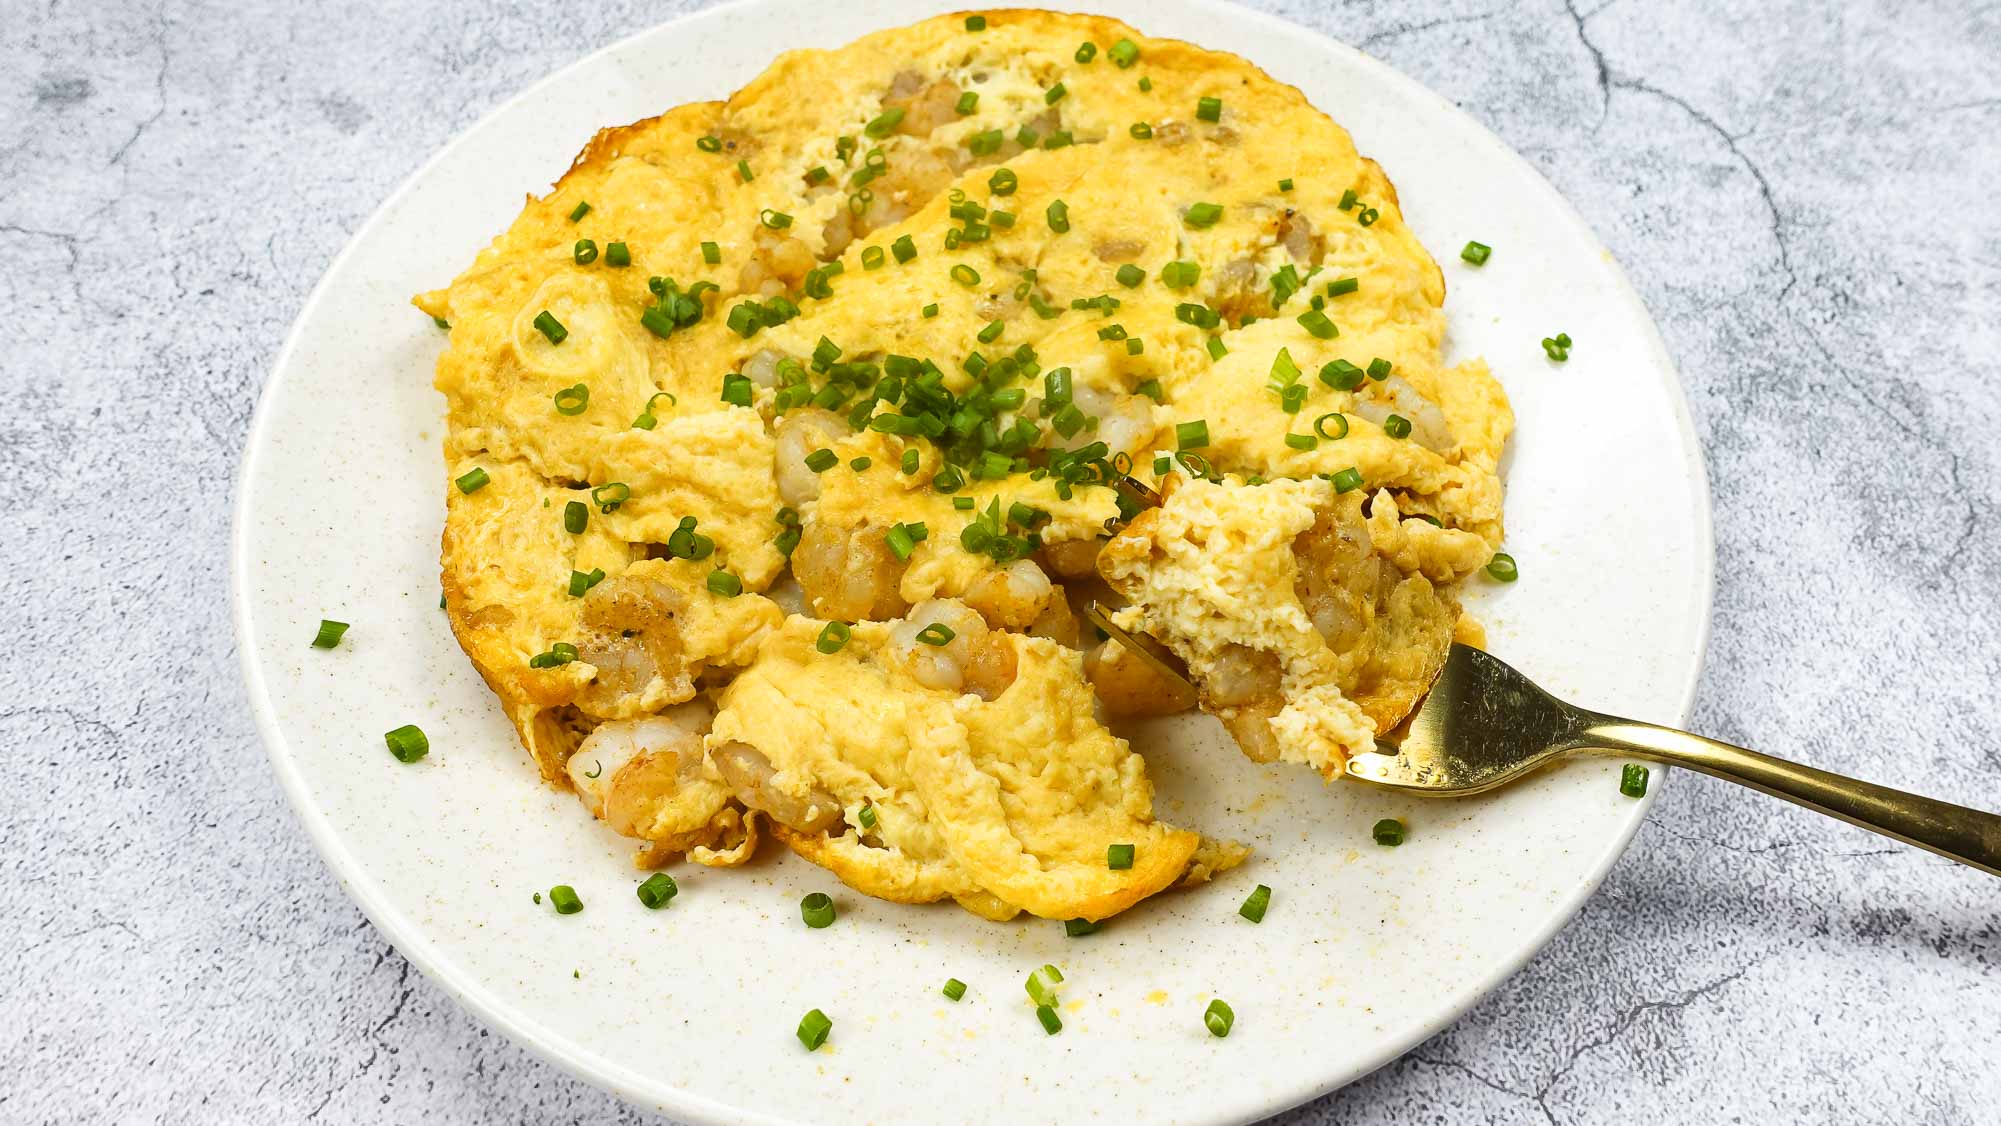 Shrimp Omelette on a plate with green onion and a fork full of omelette.